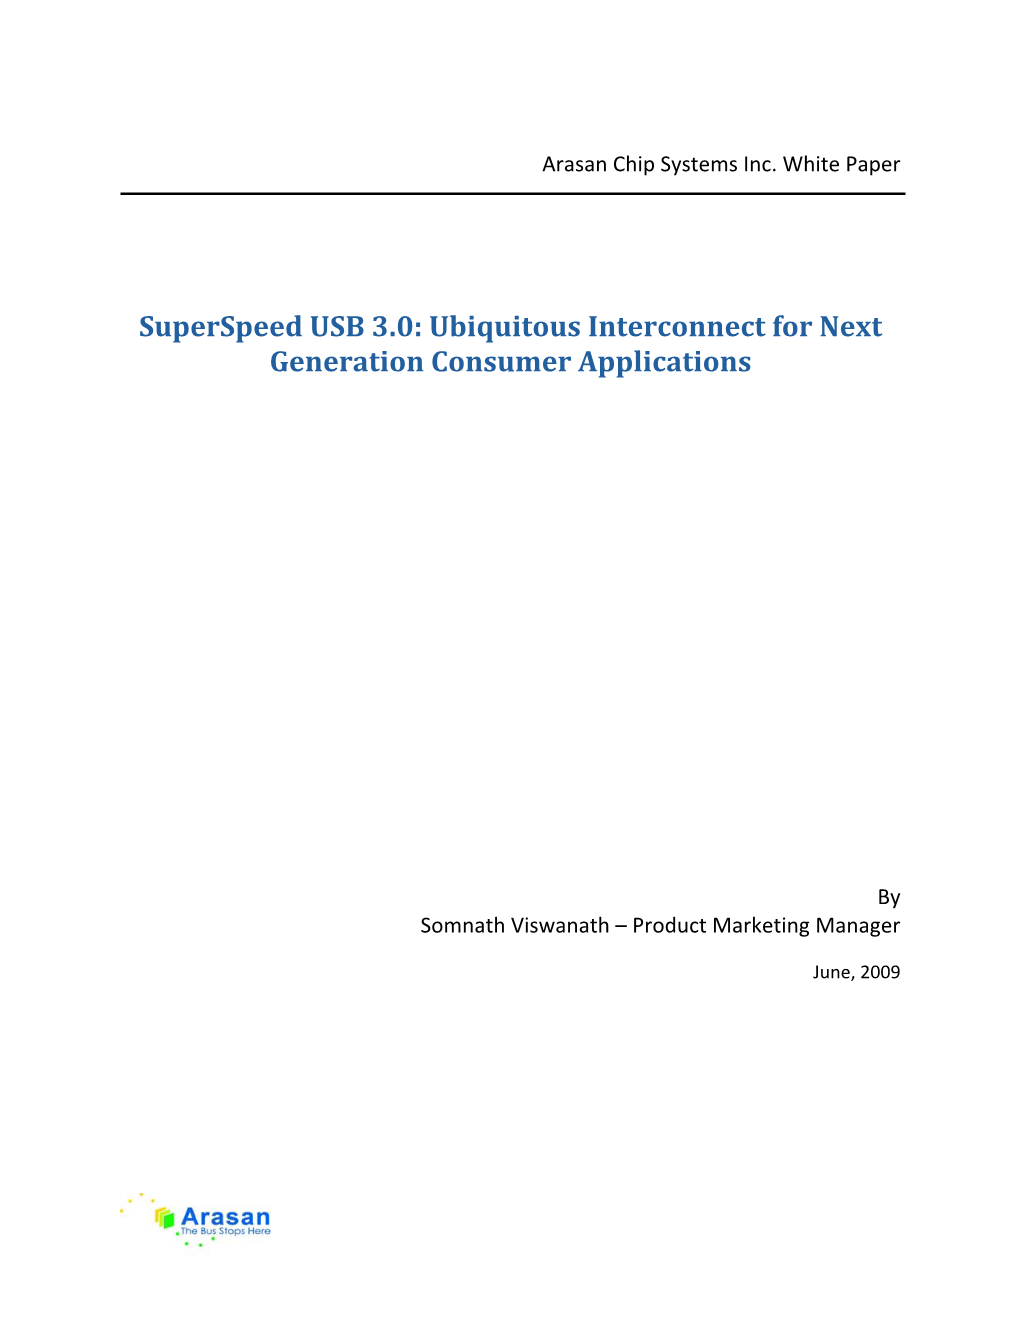 Superspeed USB 3.0: Ubiquitous Interconnect for Next Generation Consumer Applications